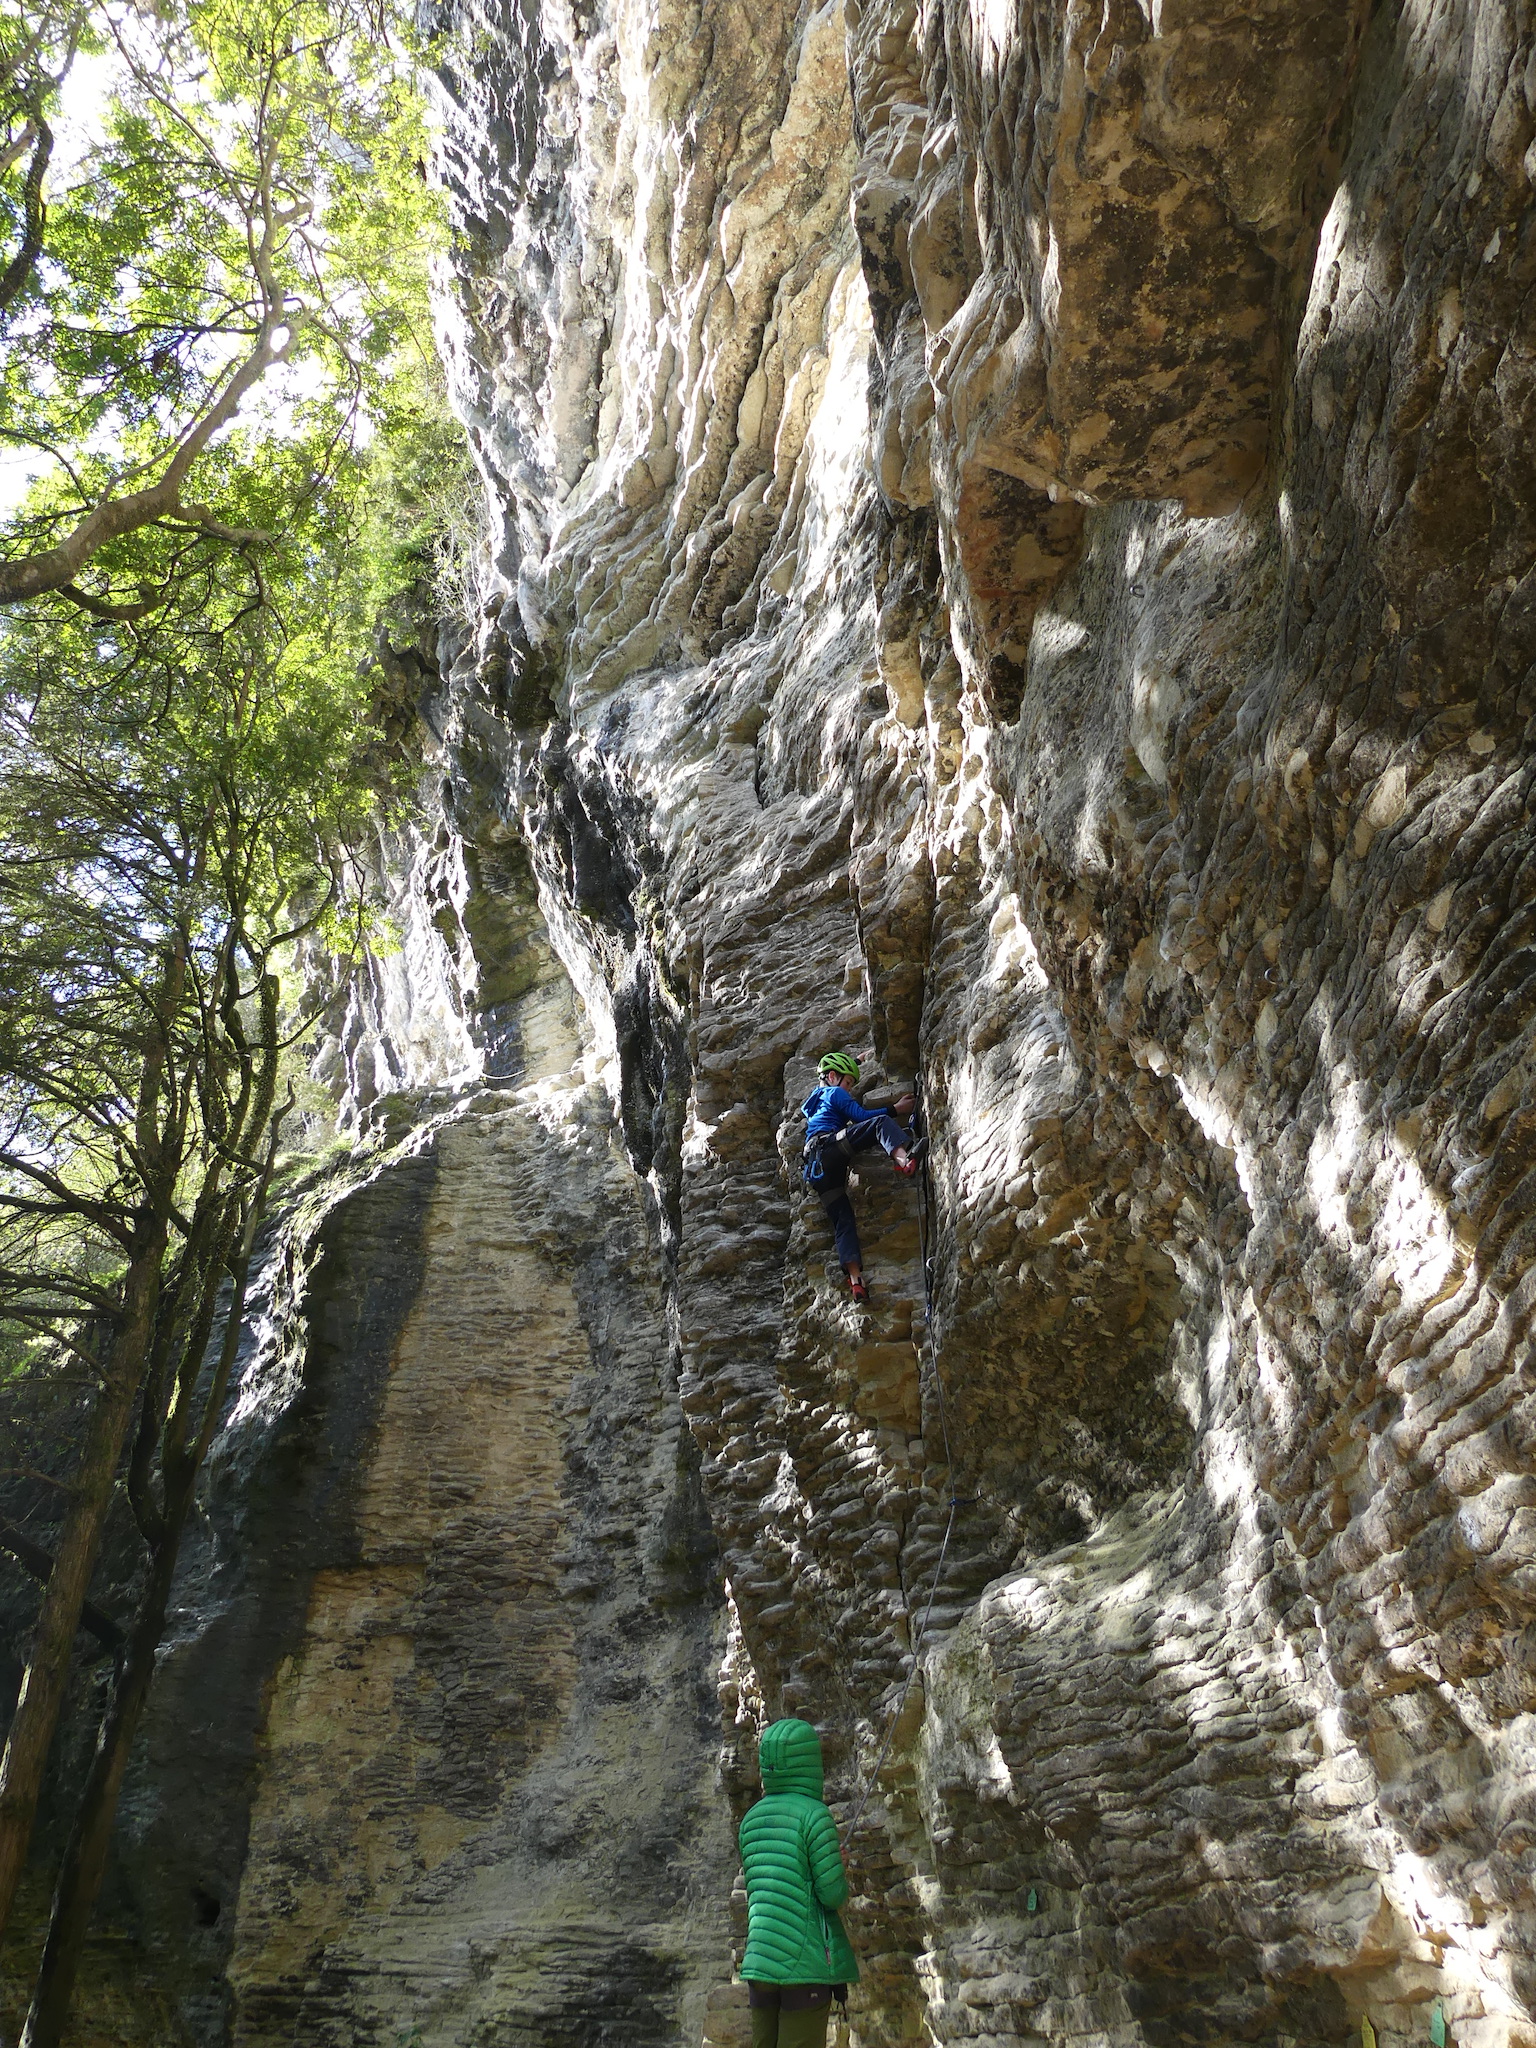 Aiden on his first ever lead climb, cruising 'French Ethics' (grade 15) in the Colosseum at Mangaokewa.